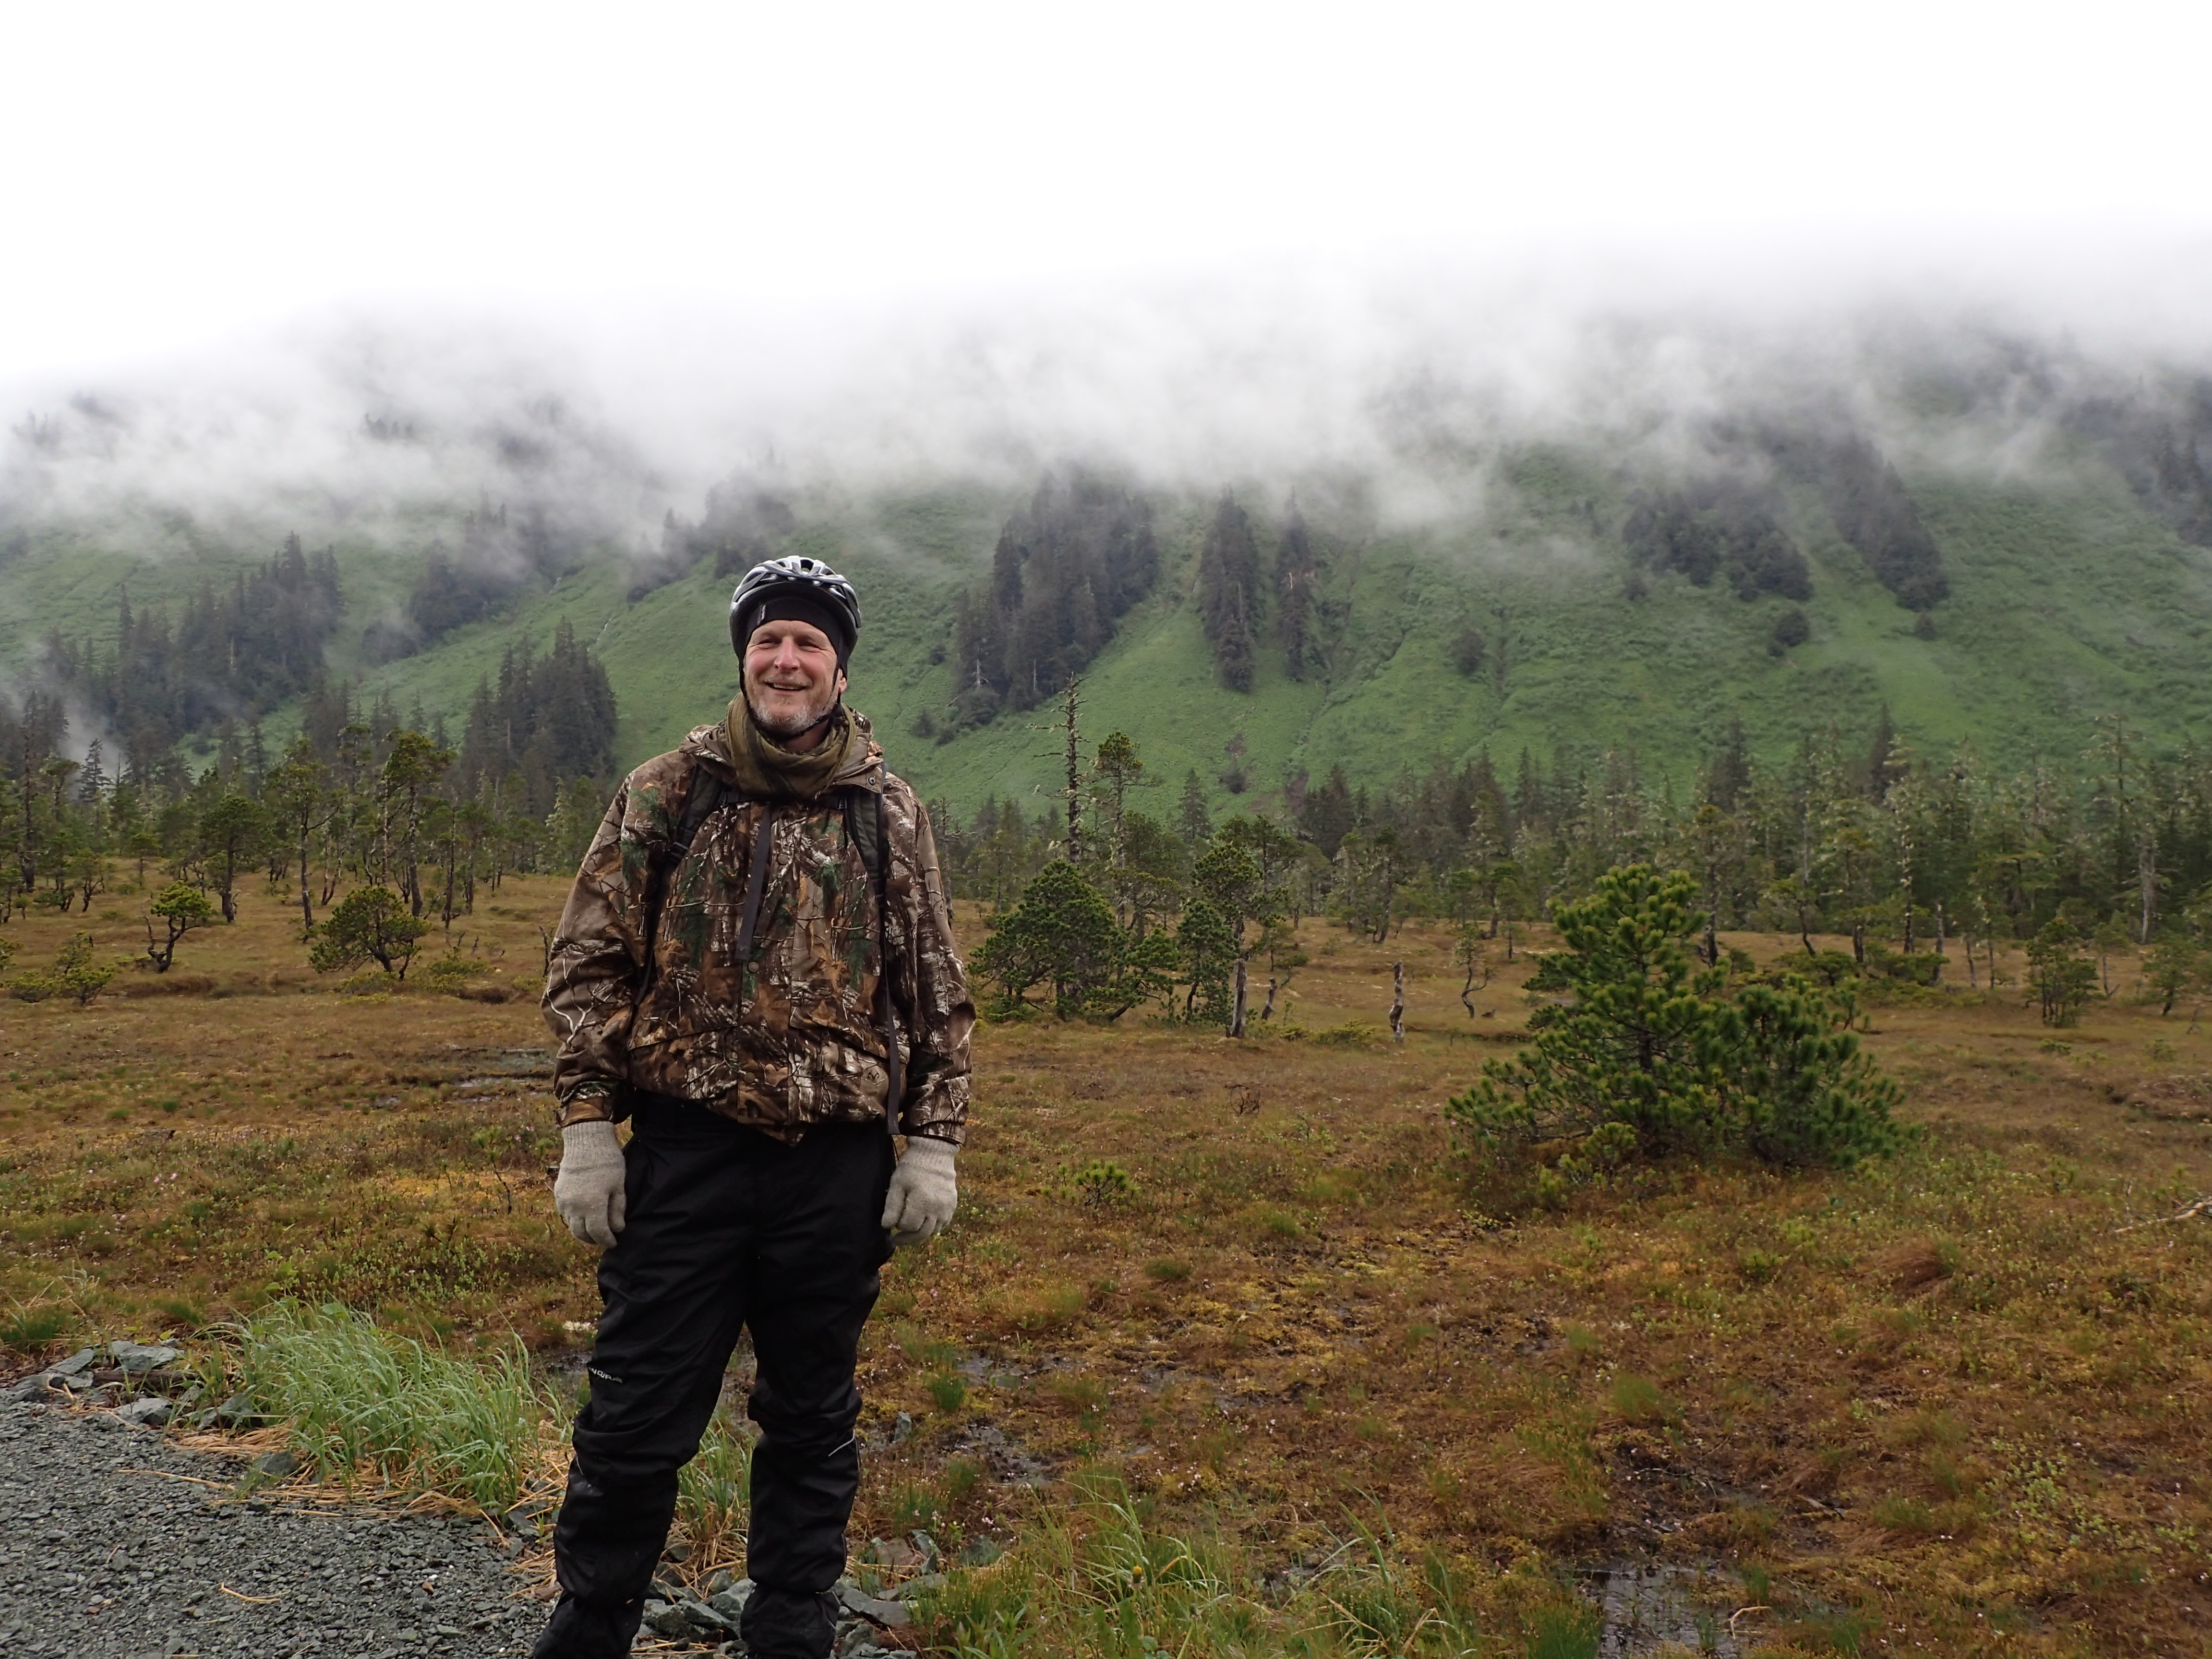 Biking in the mountains above Juneau.